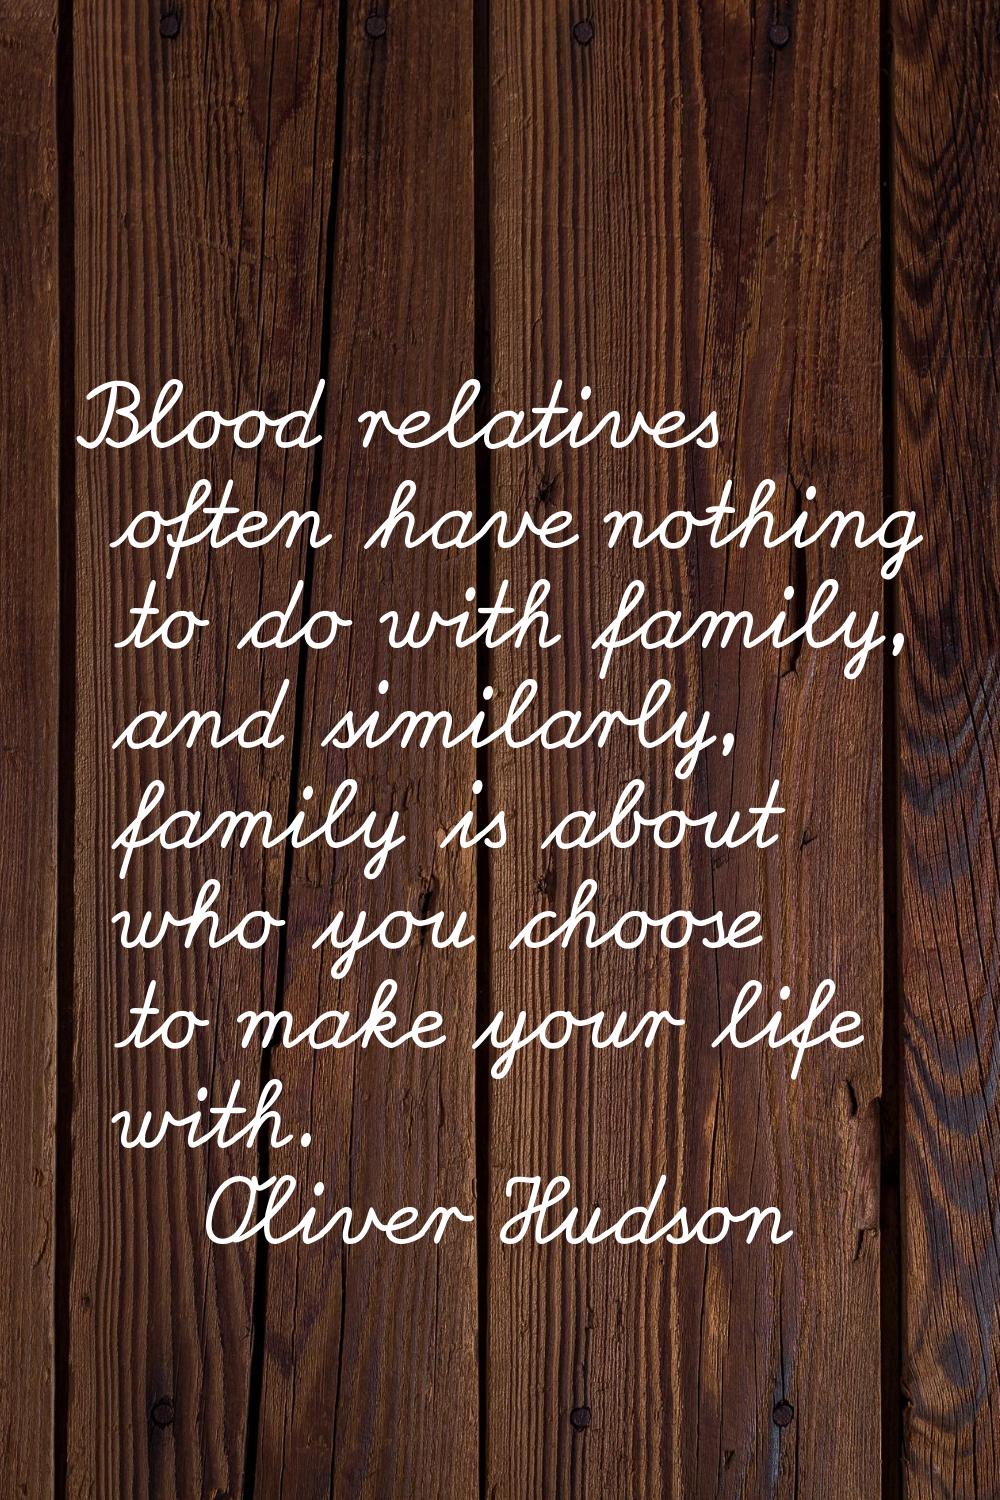 Blood relatives often have nothing to do with family, and similarly, family is about who you choose